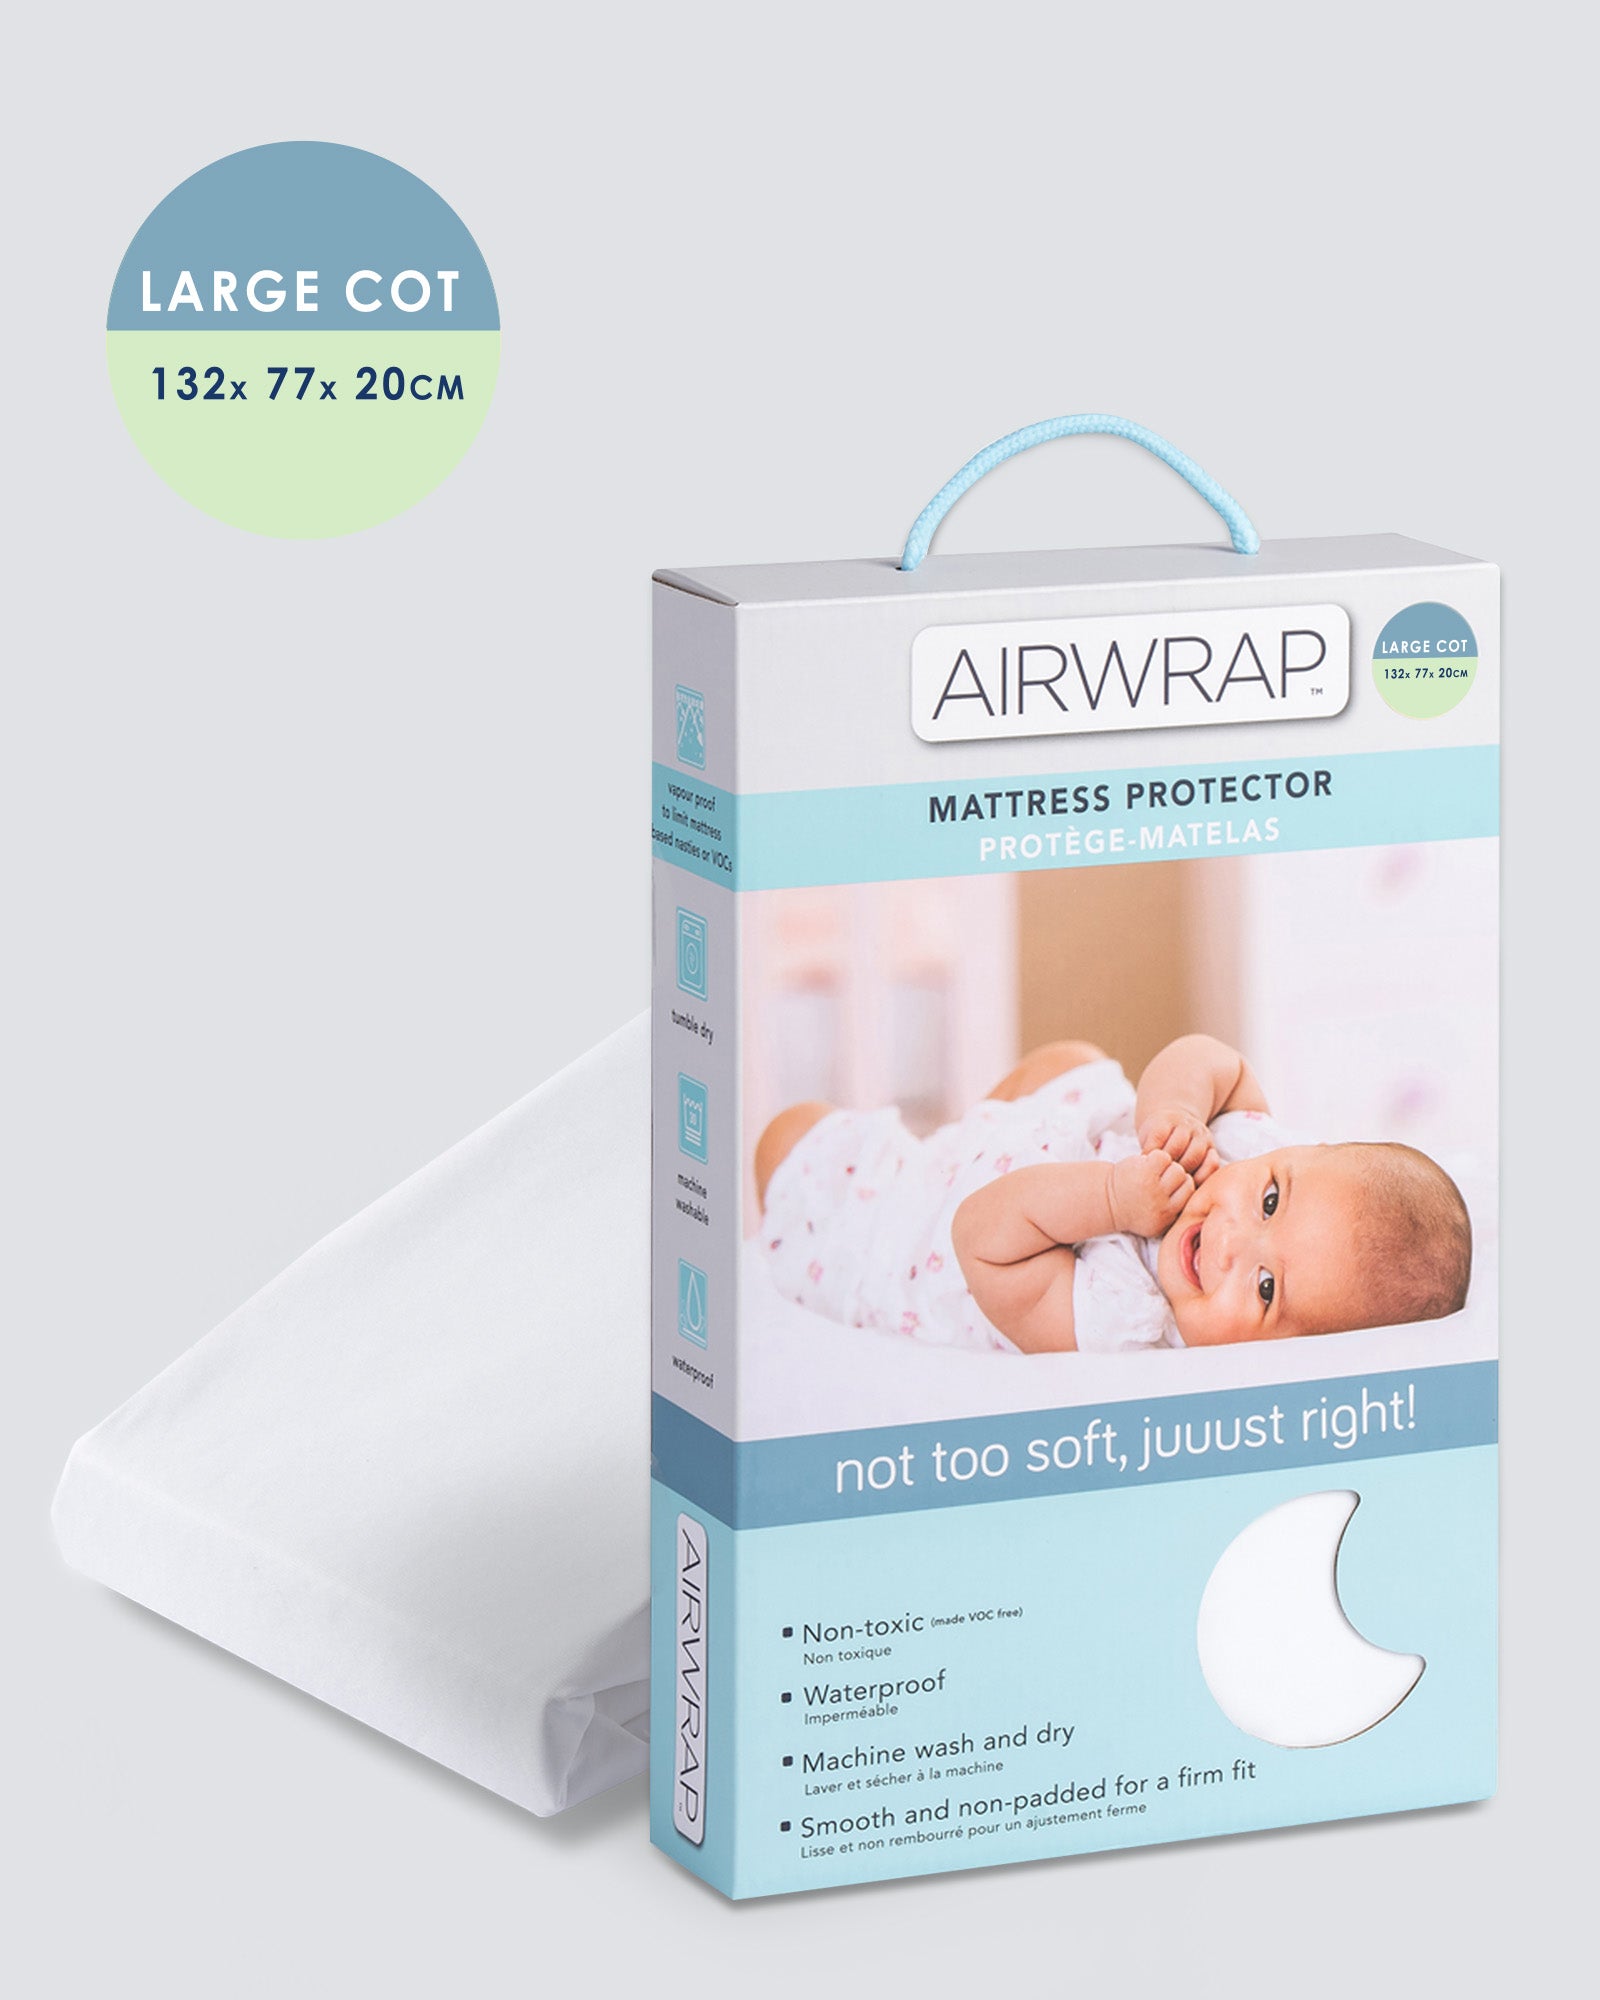 Airwrap Mattress Protector Large Cot pack product sidepack